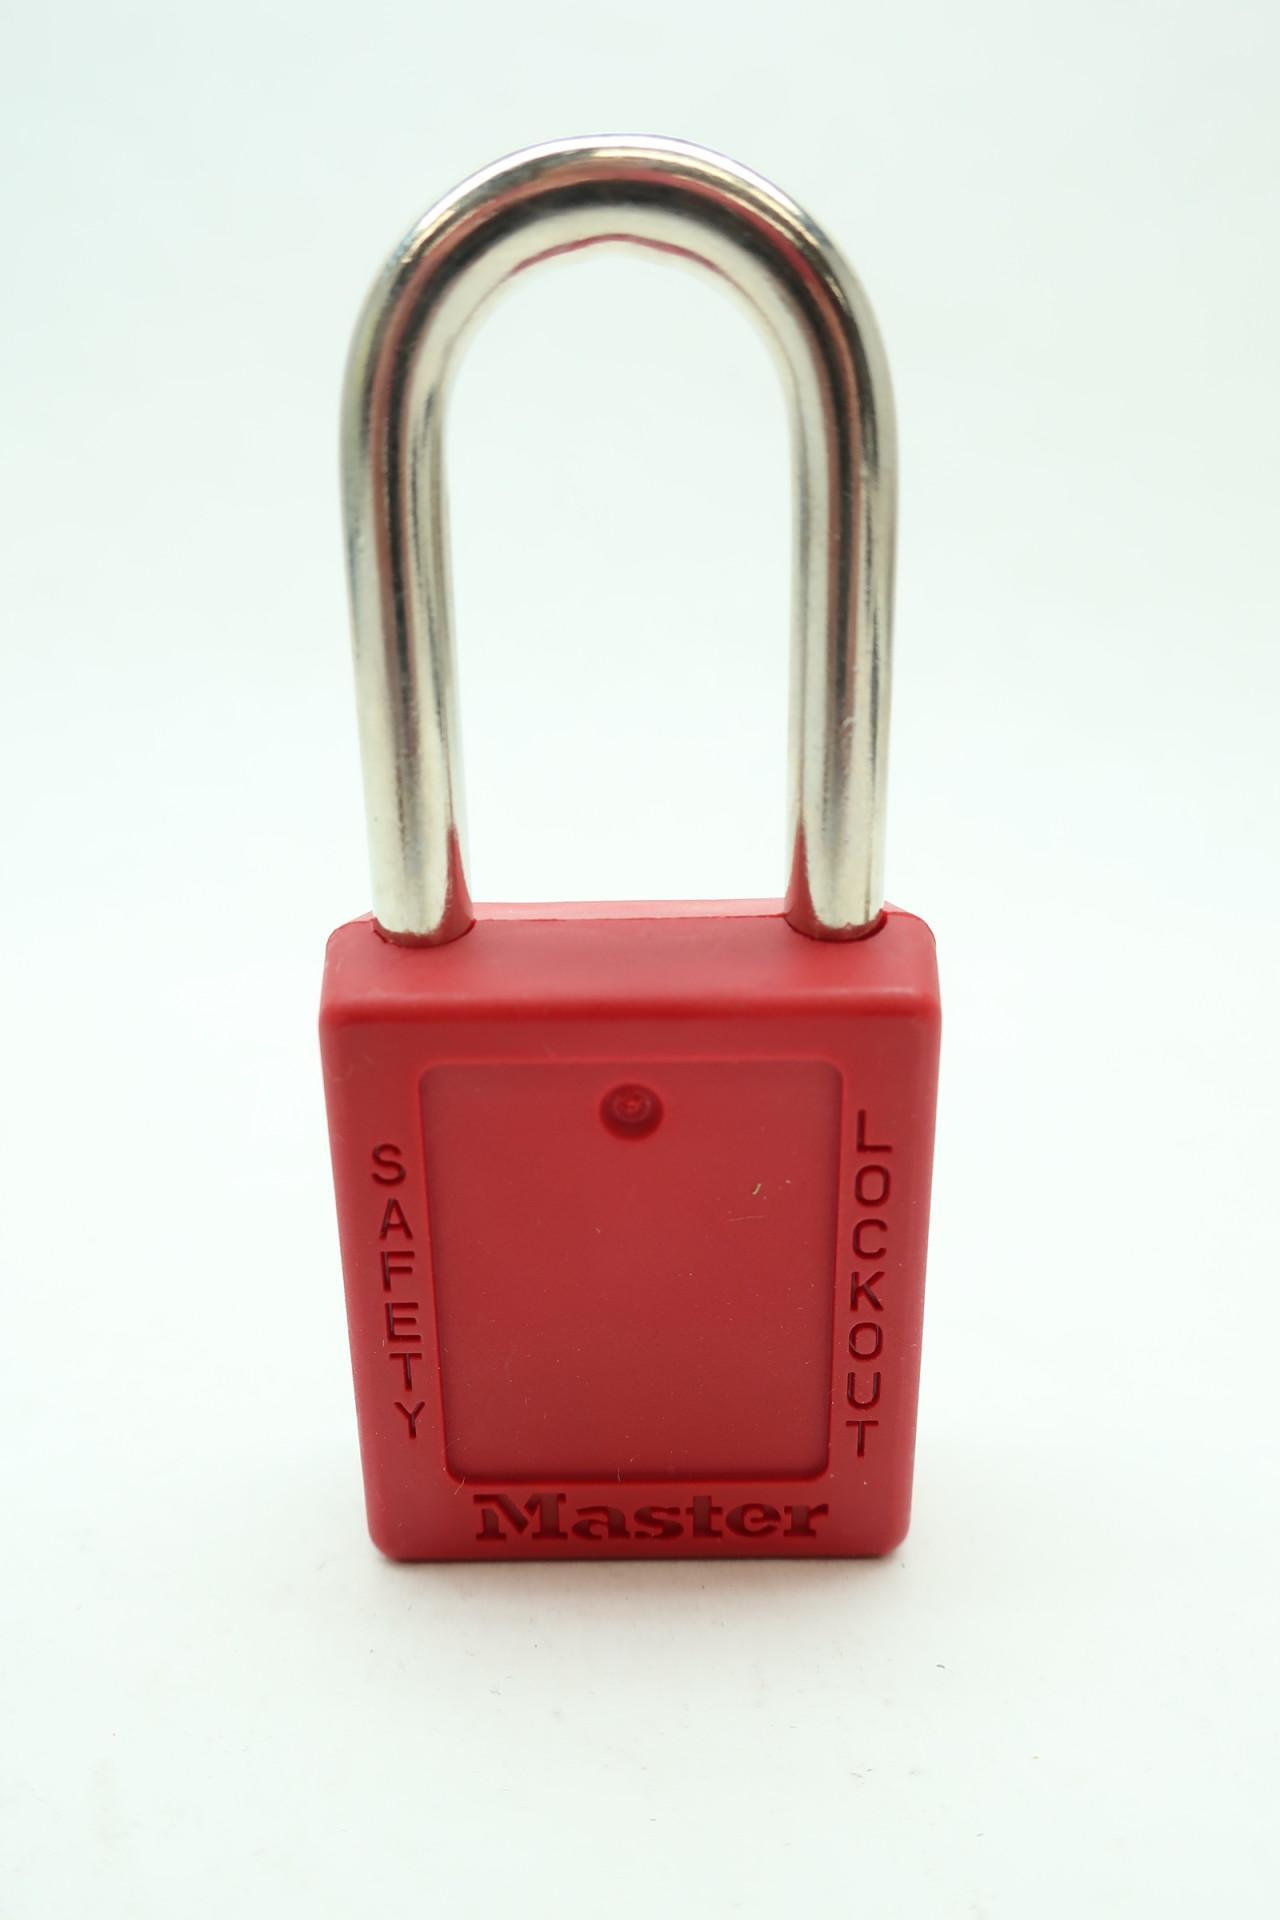 2x New Master Lock 410KARED Red Safety Lockout Padlock With Key 